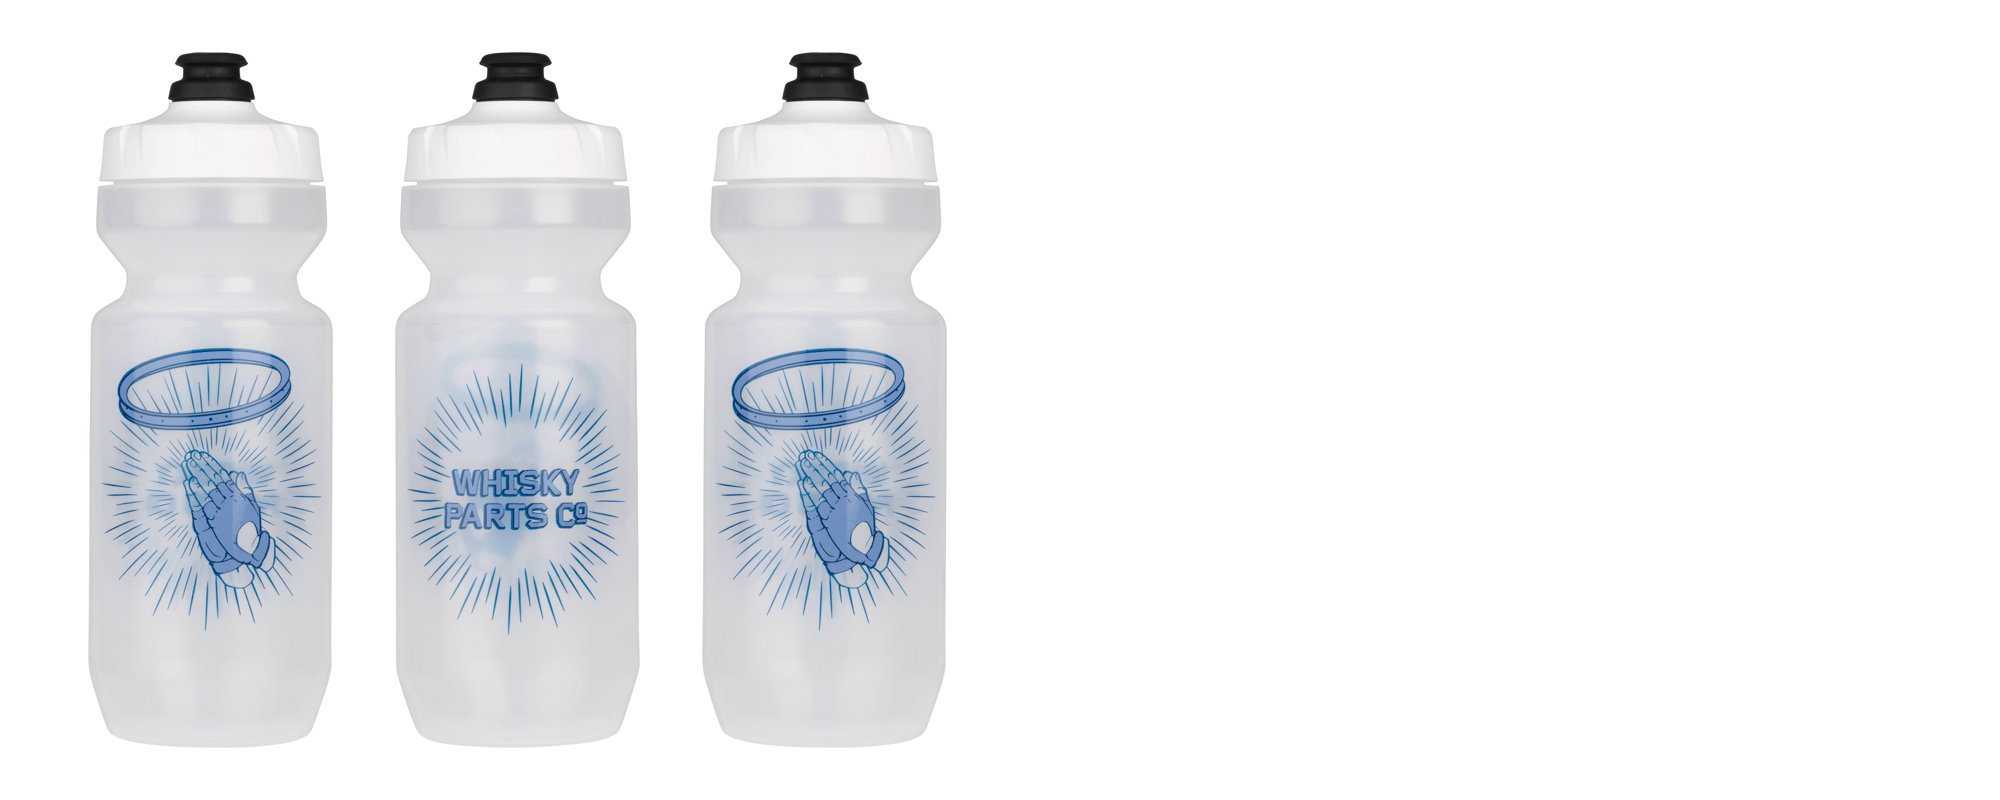 Whisky Revere the Ride Water Bottle - Clear - Front and back views